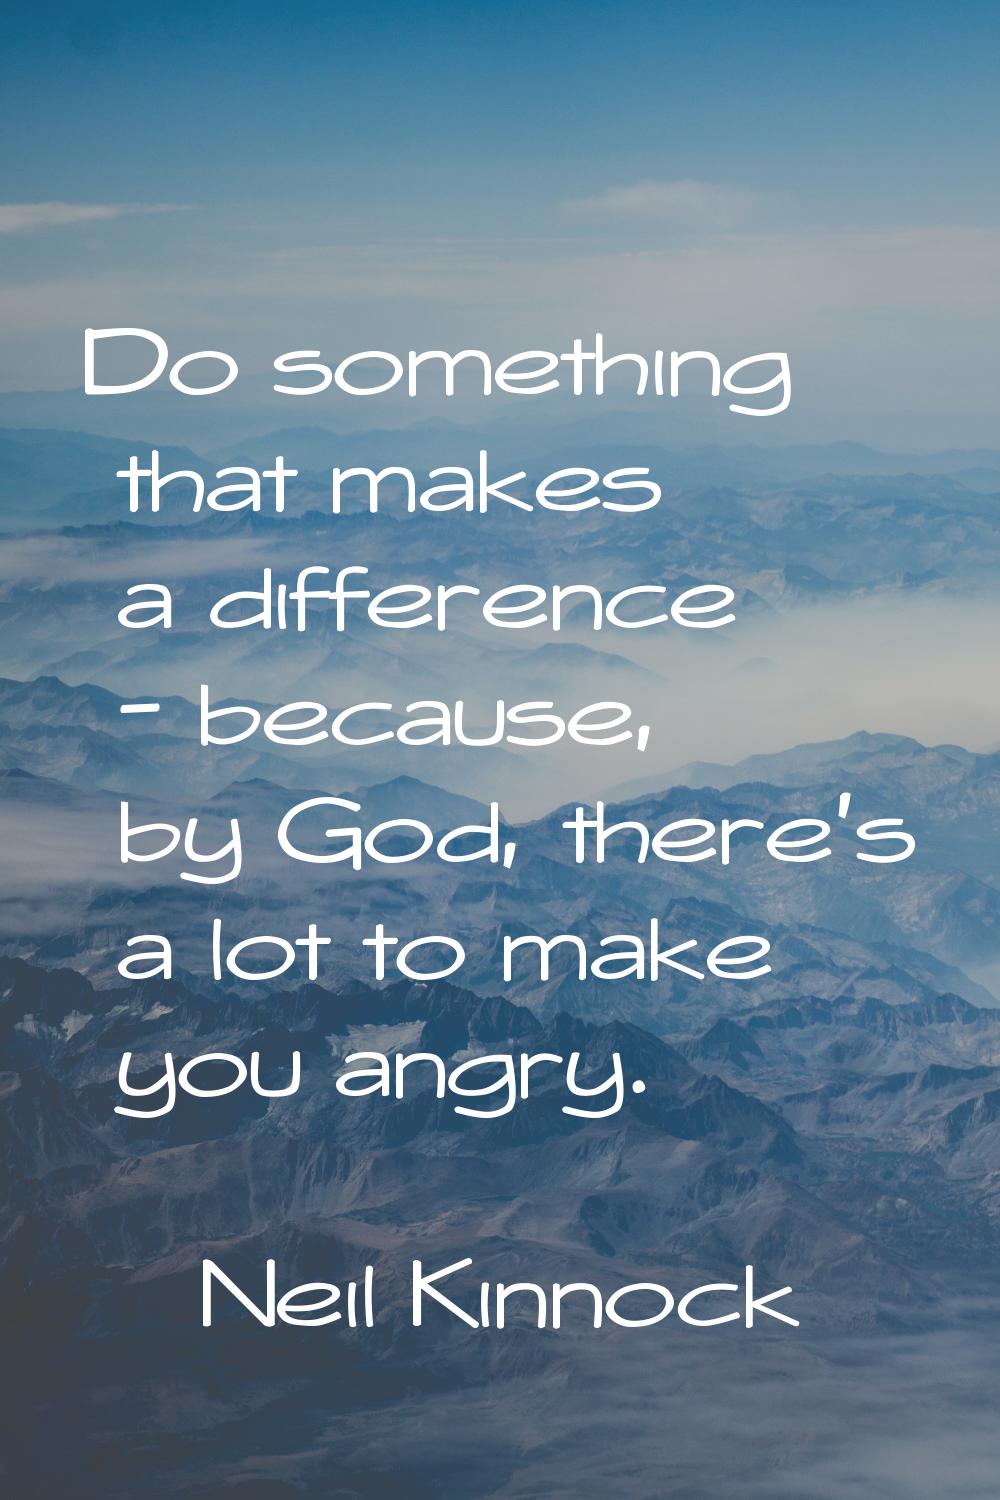 Do something that makes a difference - because, by God, there's a lot to make you angry.